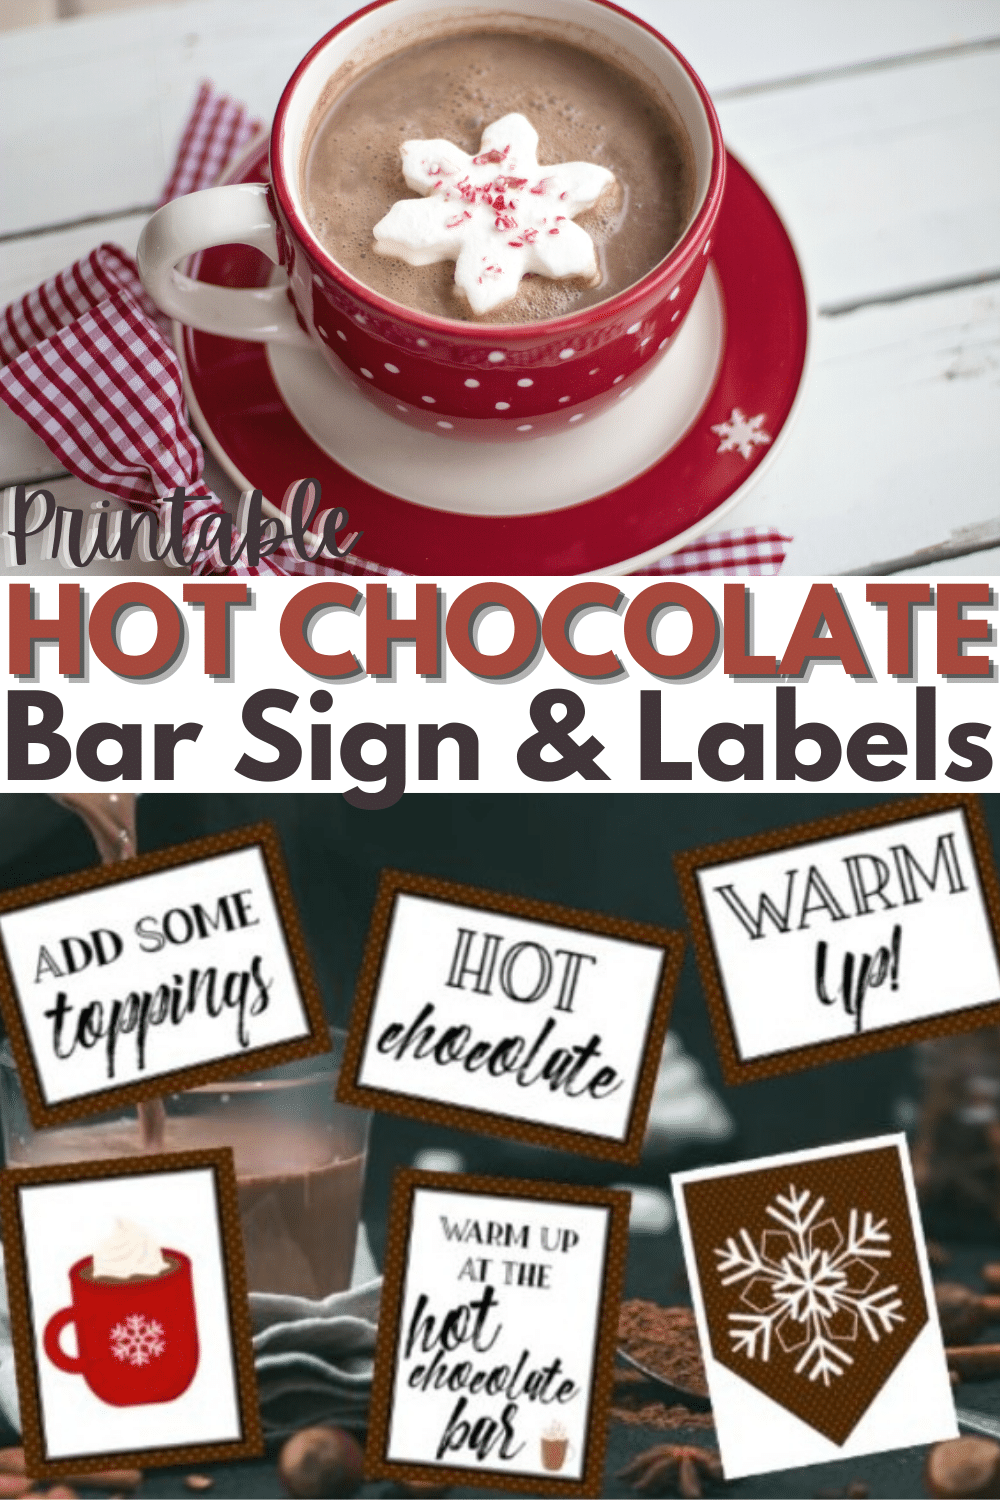 This printable hot chocolate bar sign and labels will help you hot cocoa bar stay organized and will help guests make the best mug of cocoa ever. #hotchocolate #hotcocoa #printables via @wondermomwannab